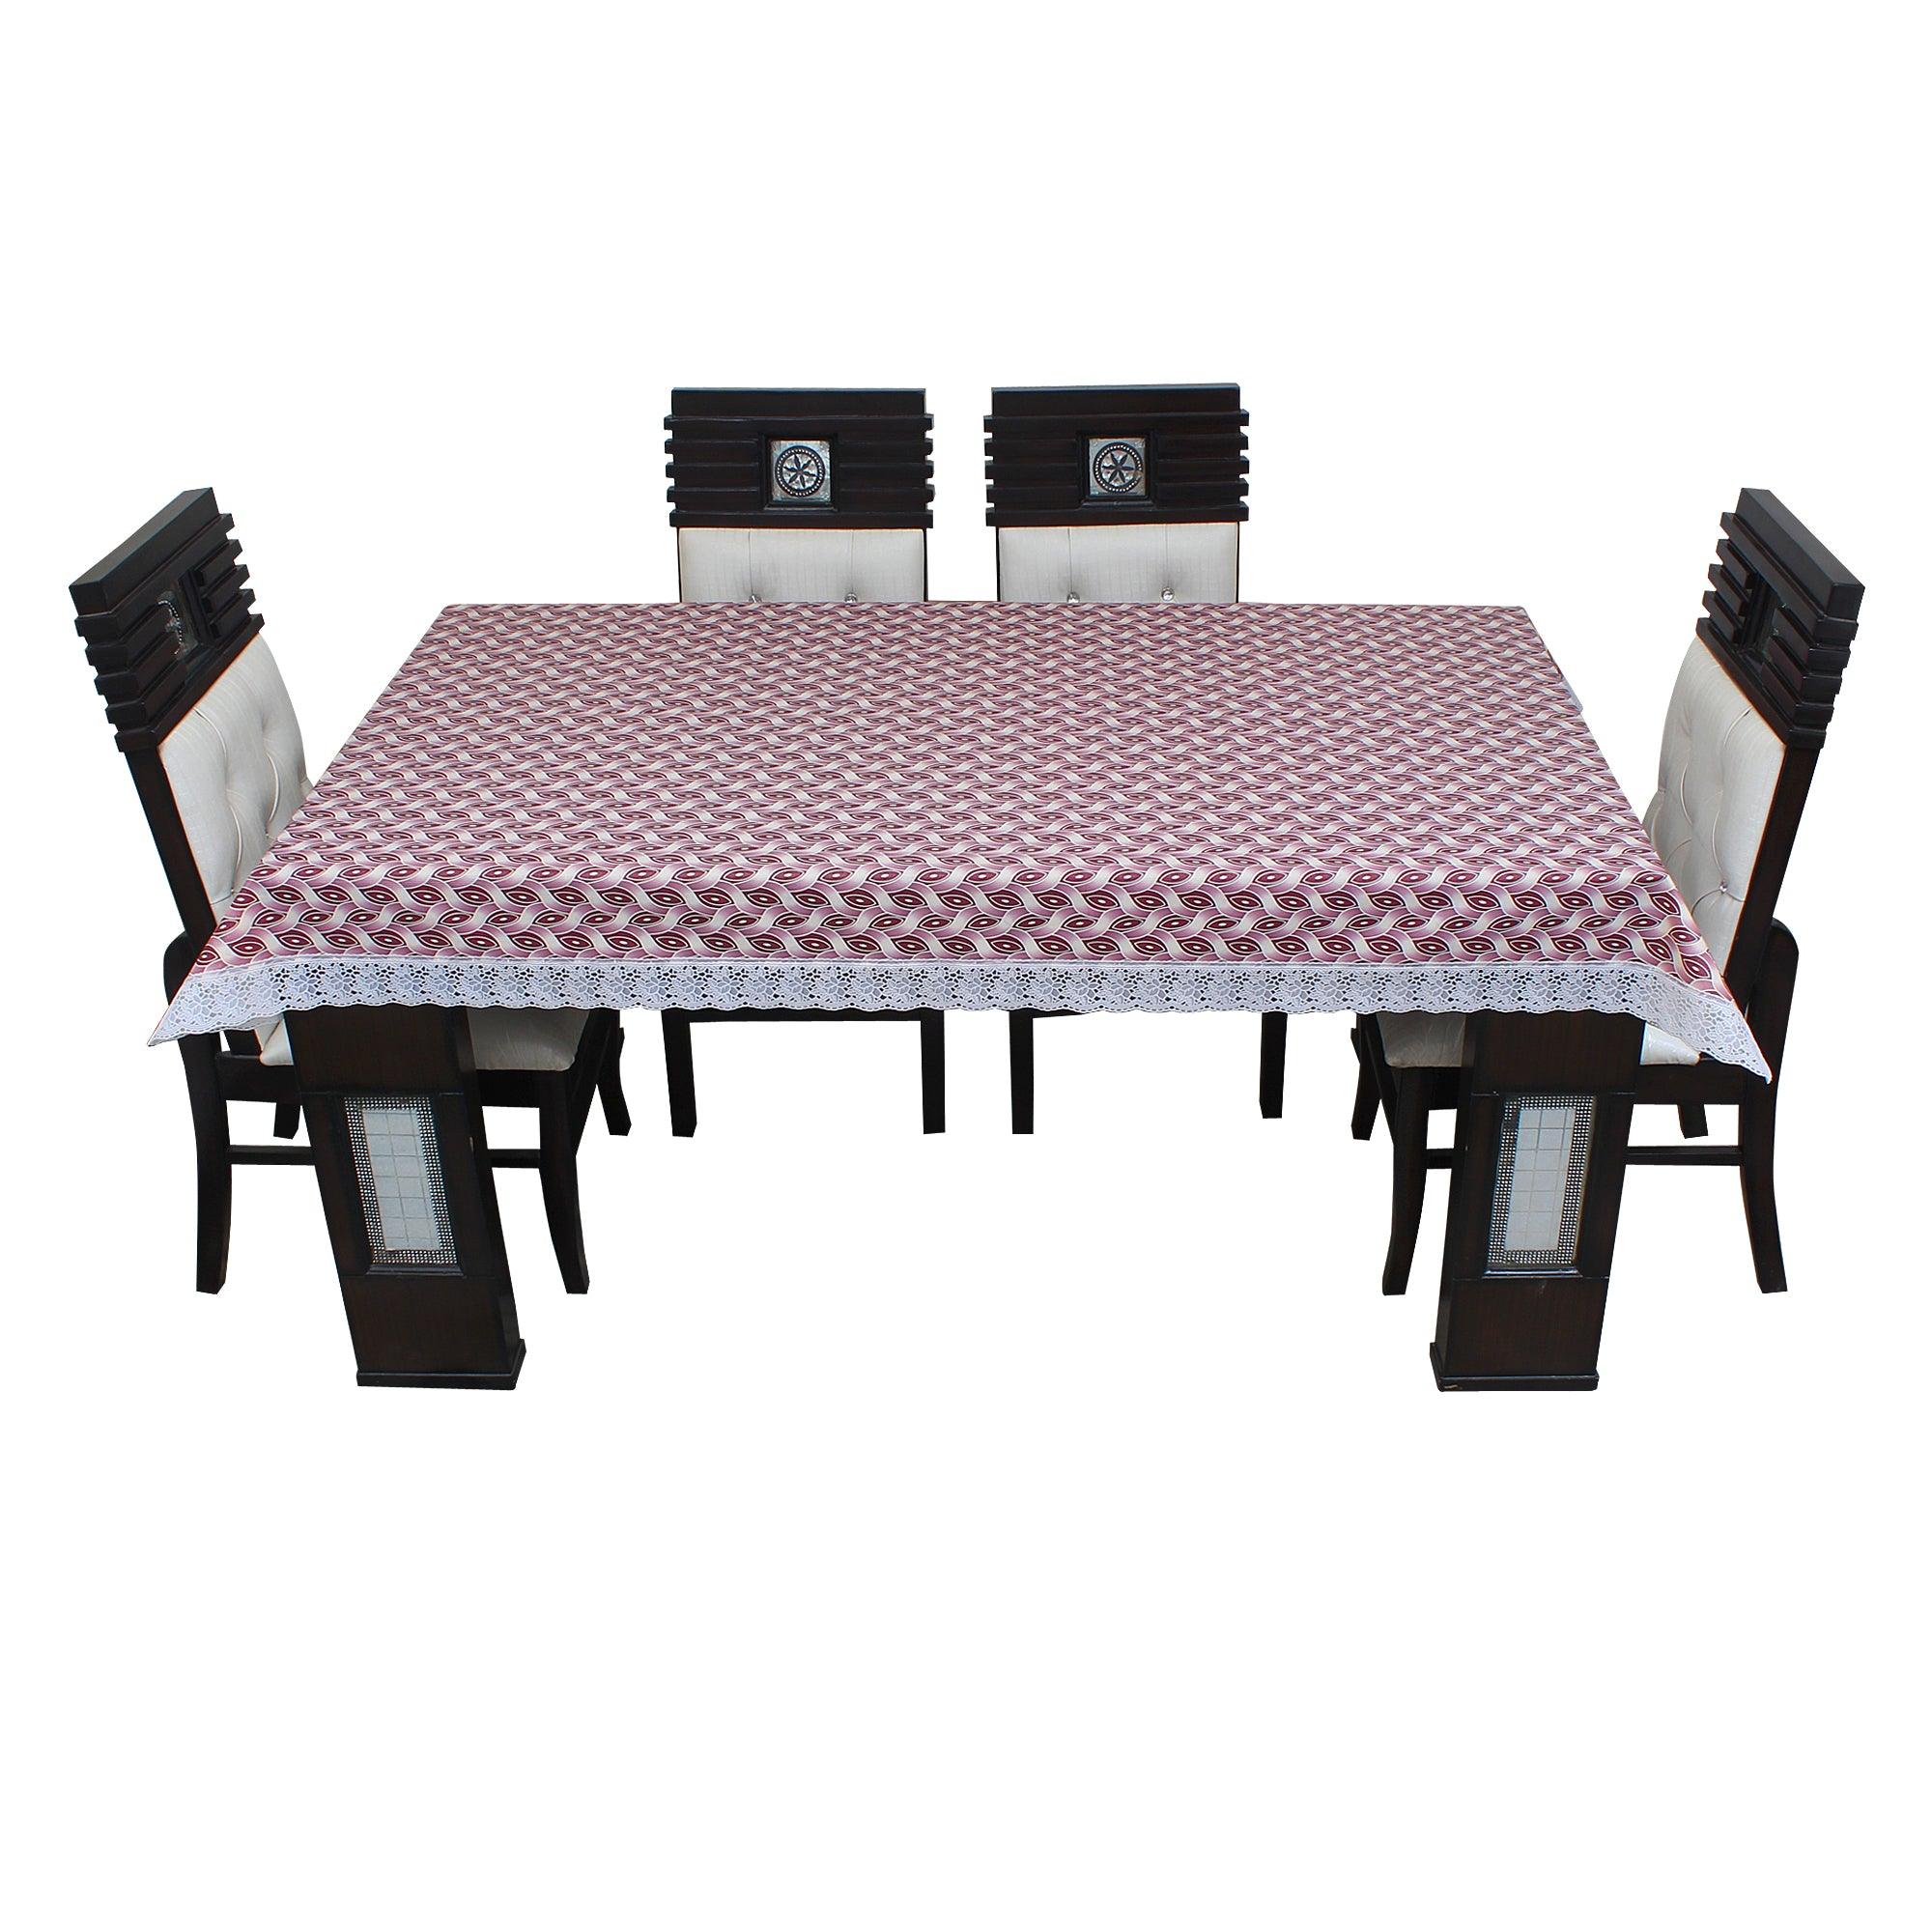 Waterproof and Dustproof Dining Table Cover, SA64 - Dream Care Furnishings Private Limited